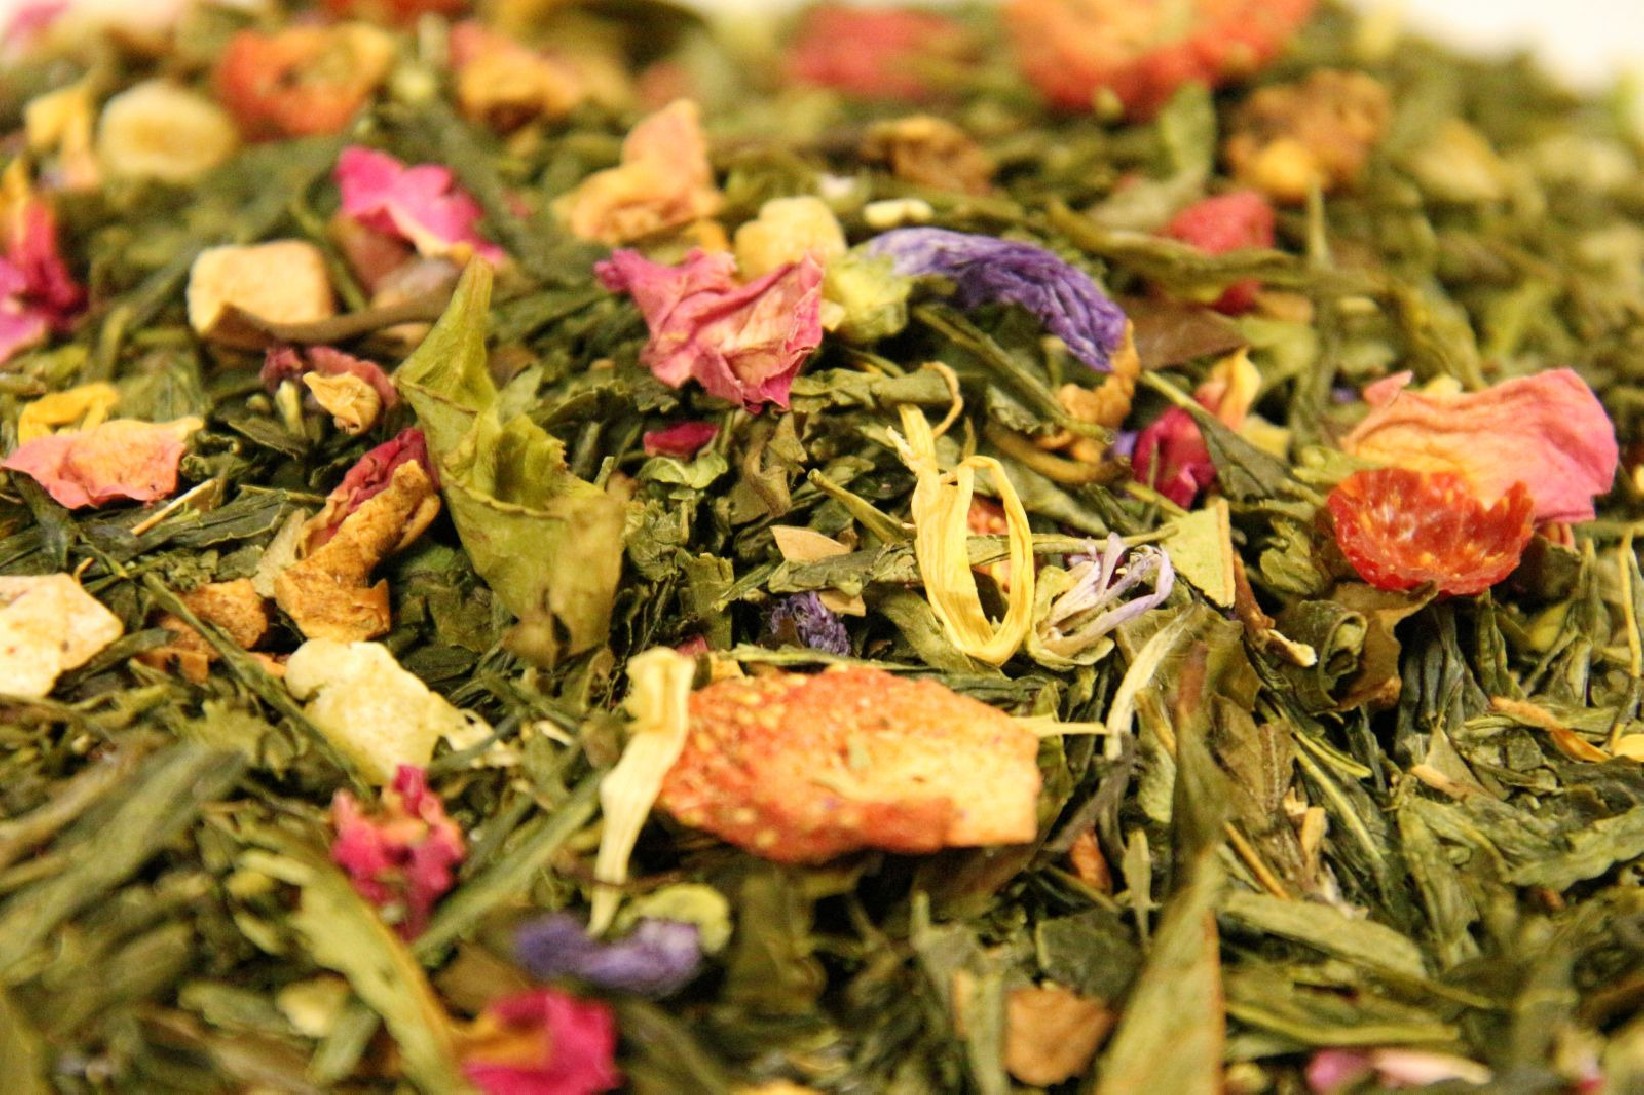 Green and white tea exotic fruit pieces mint rosebuds mallow petals